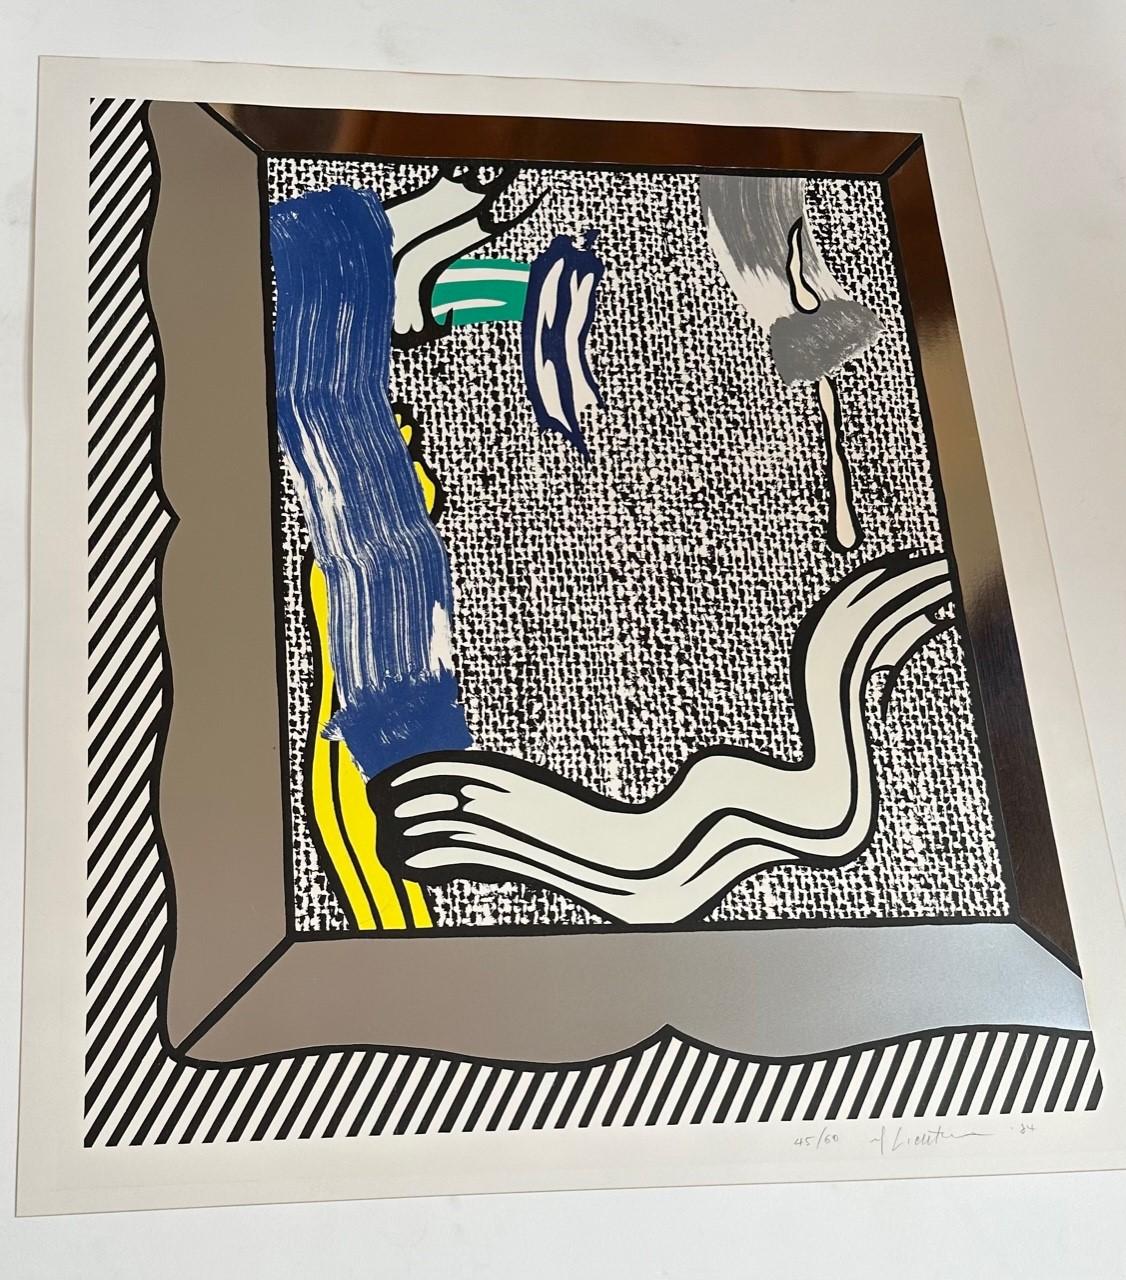 Painting on Canvas - Contemporary Print by Roy Lichtenstein